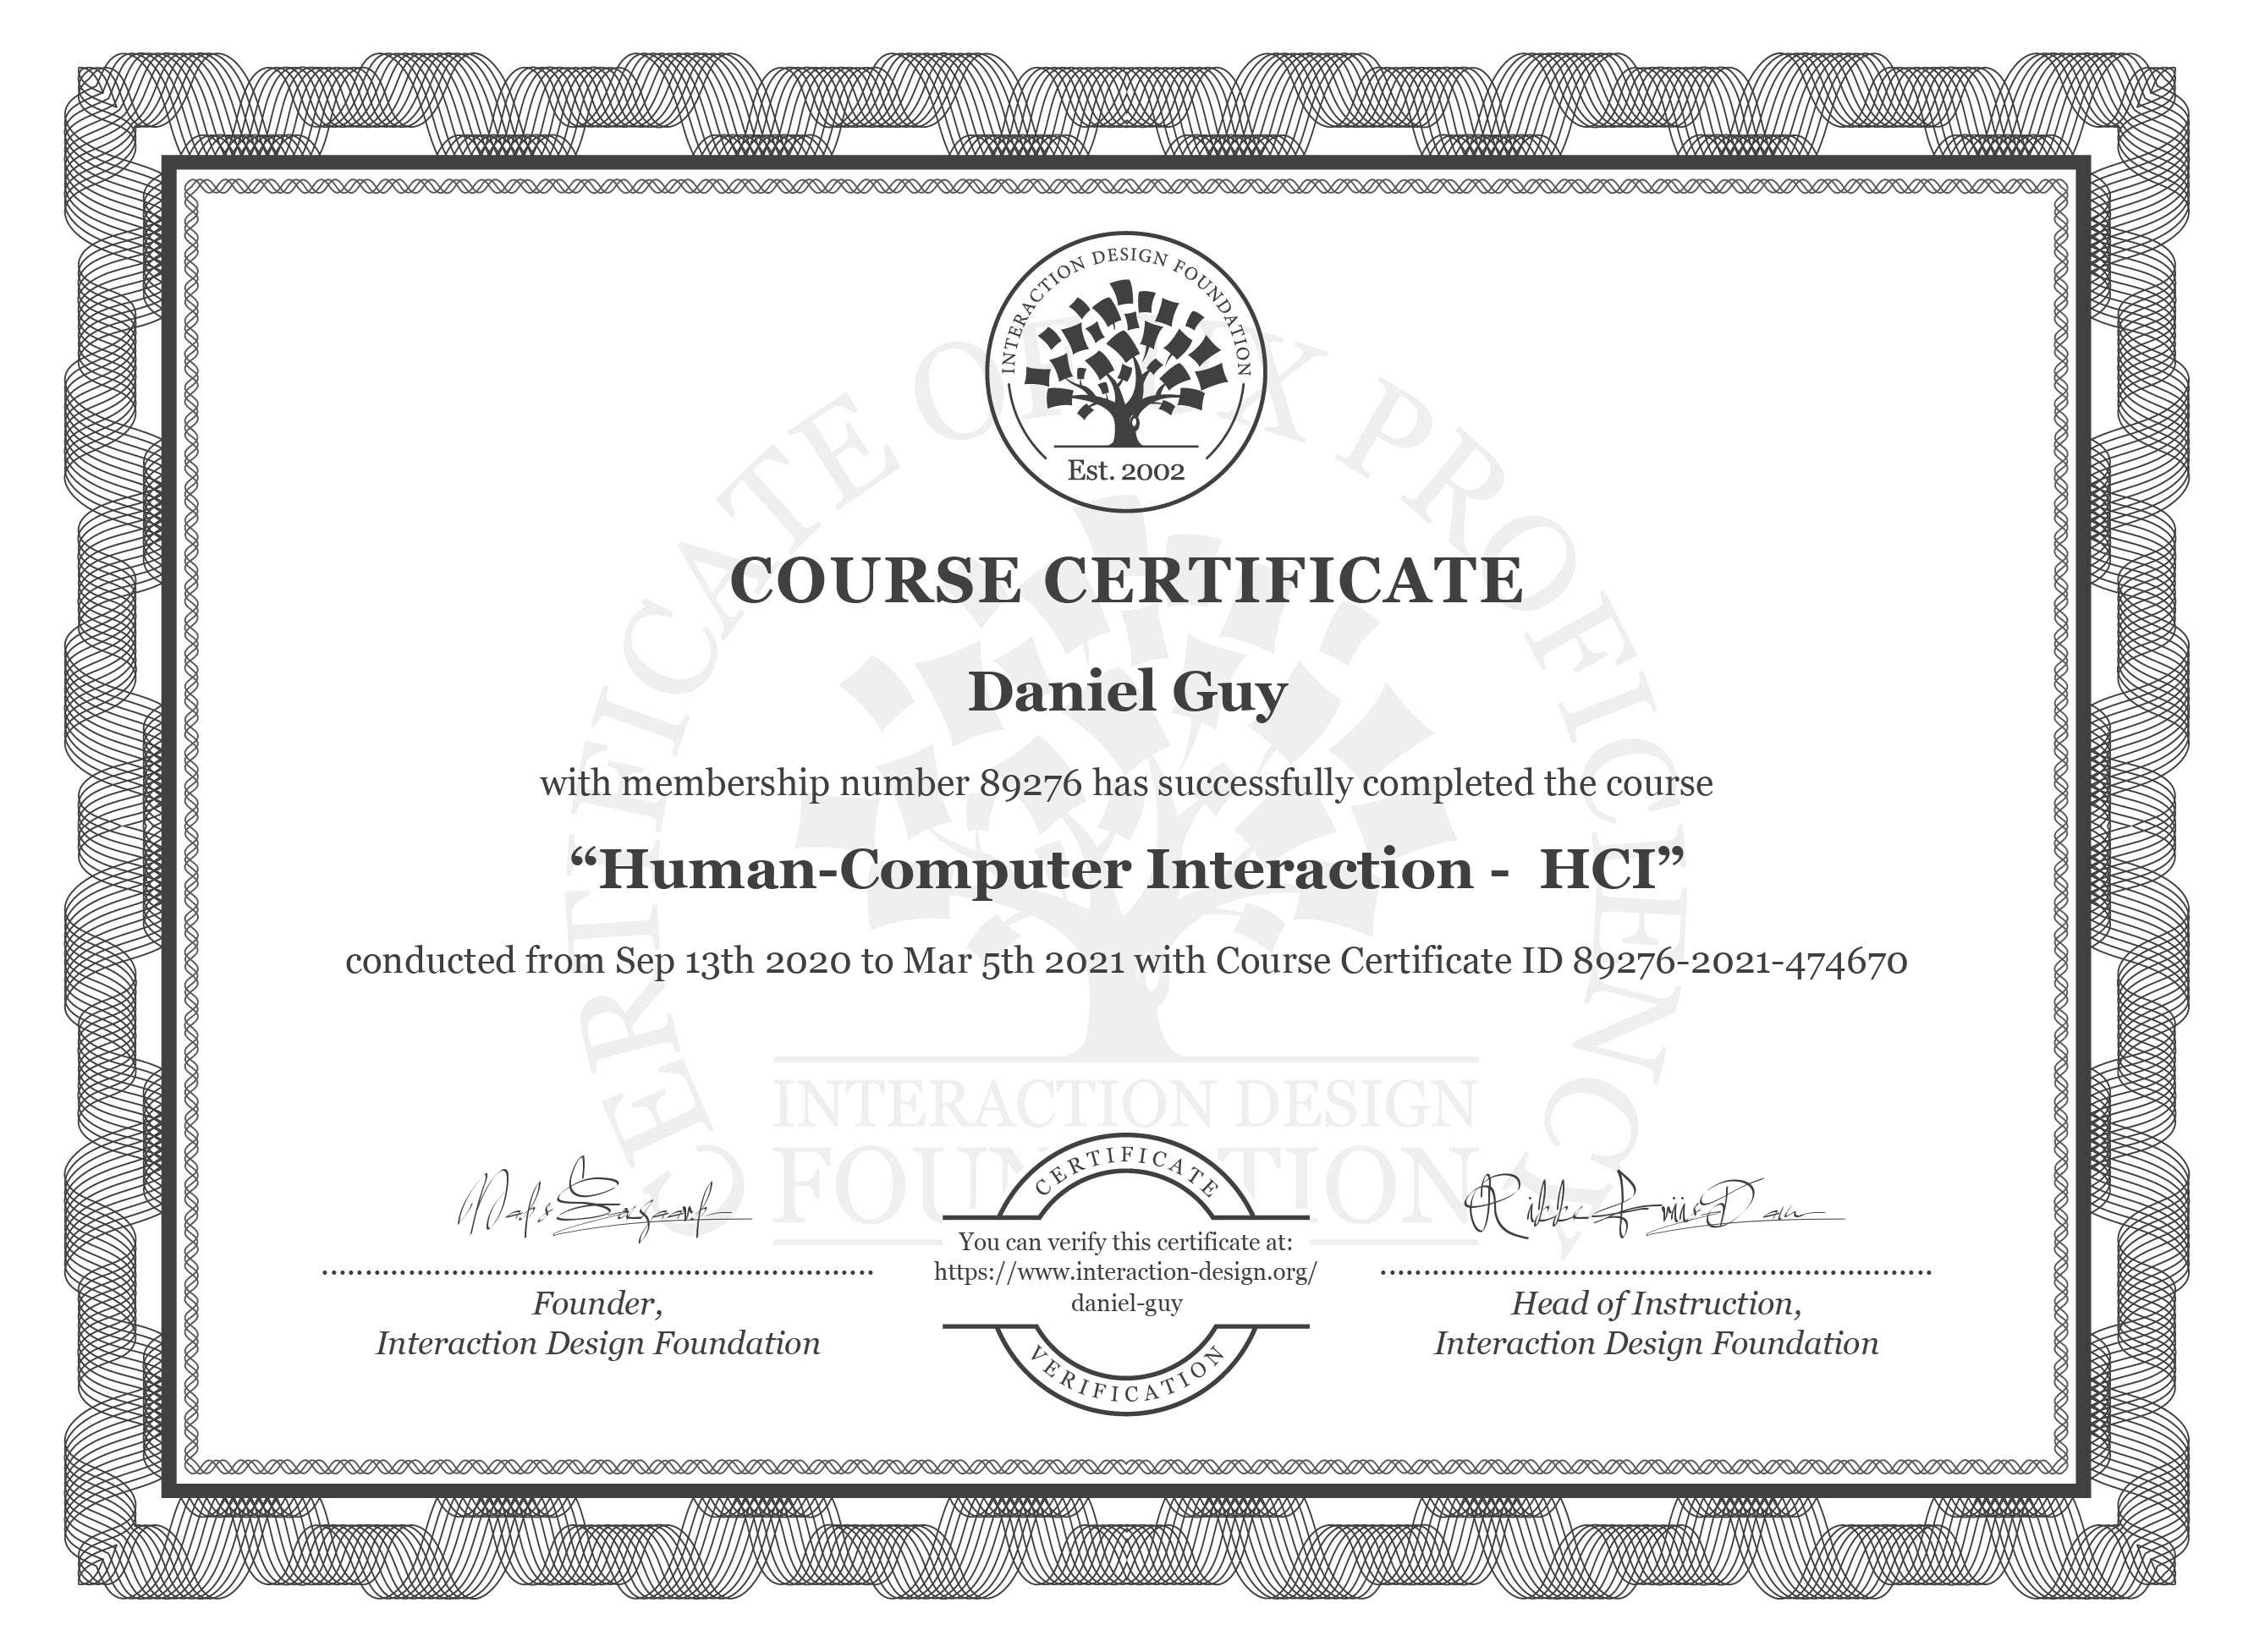 Certificate for Human-Computer Interaction course